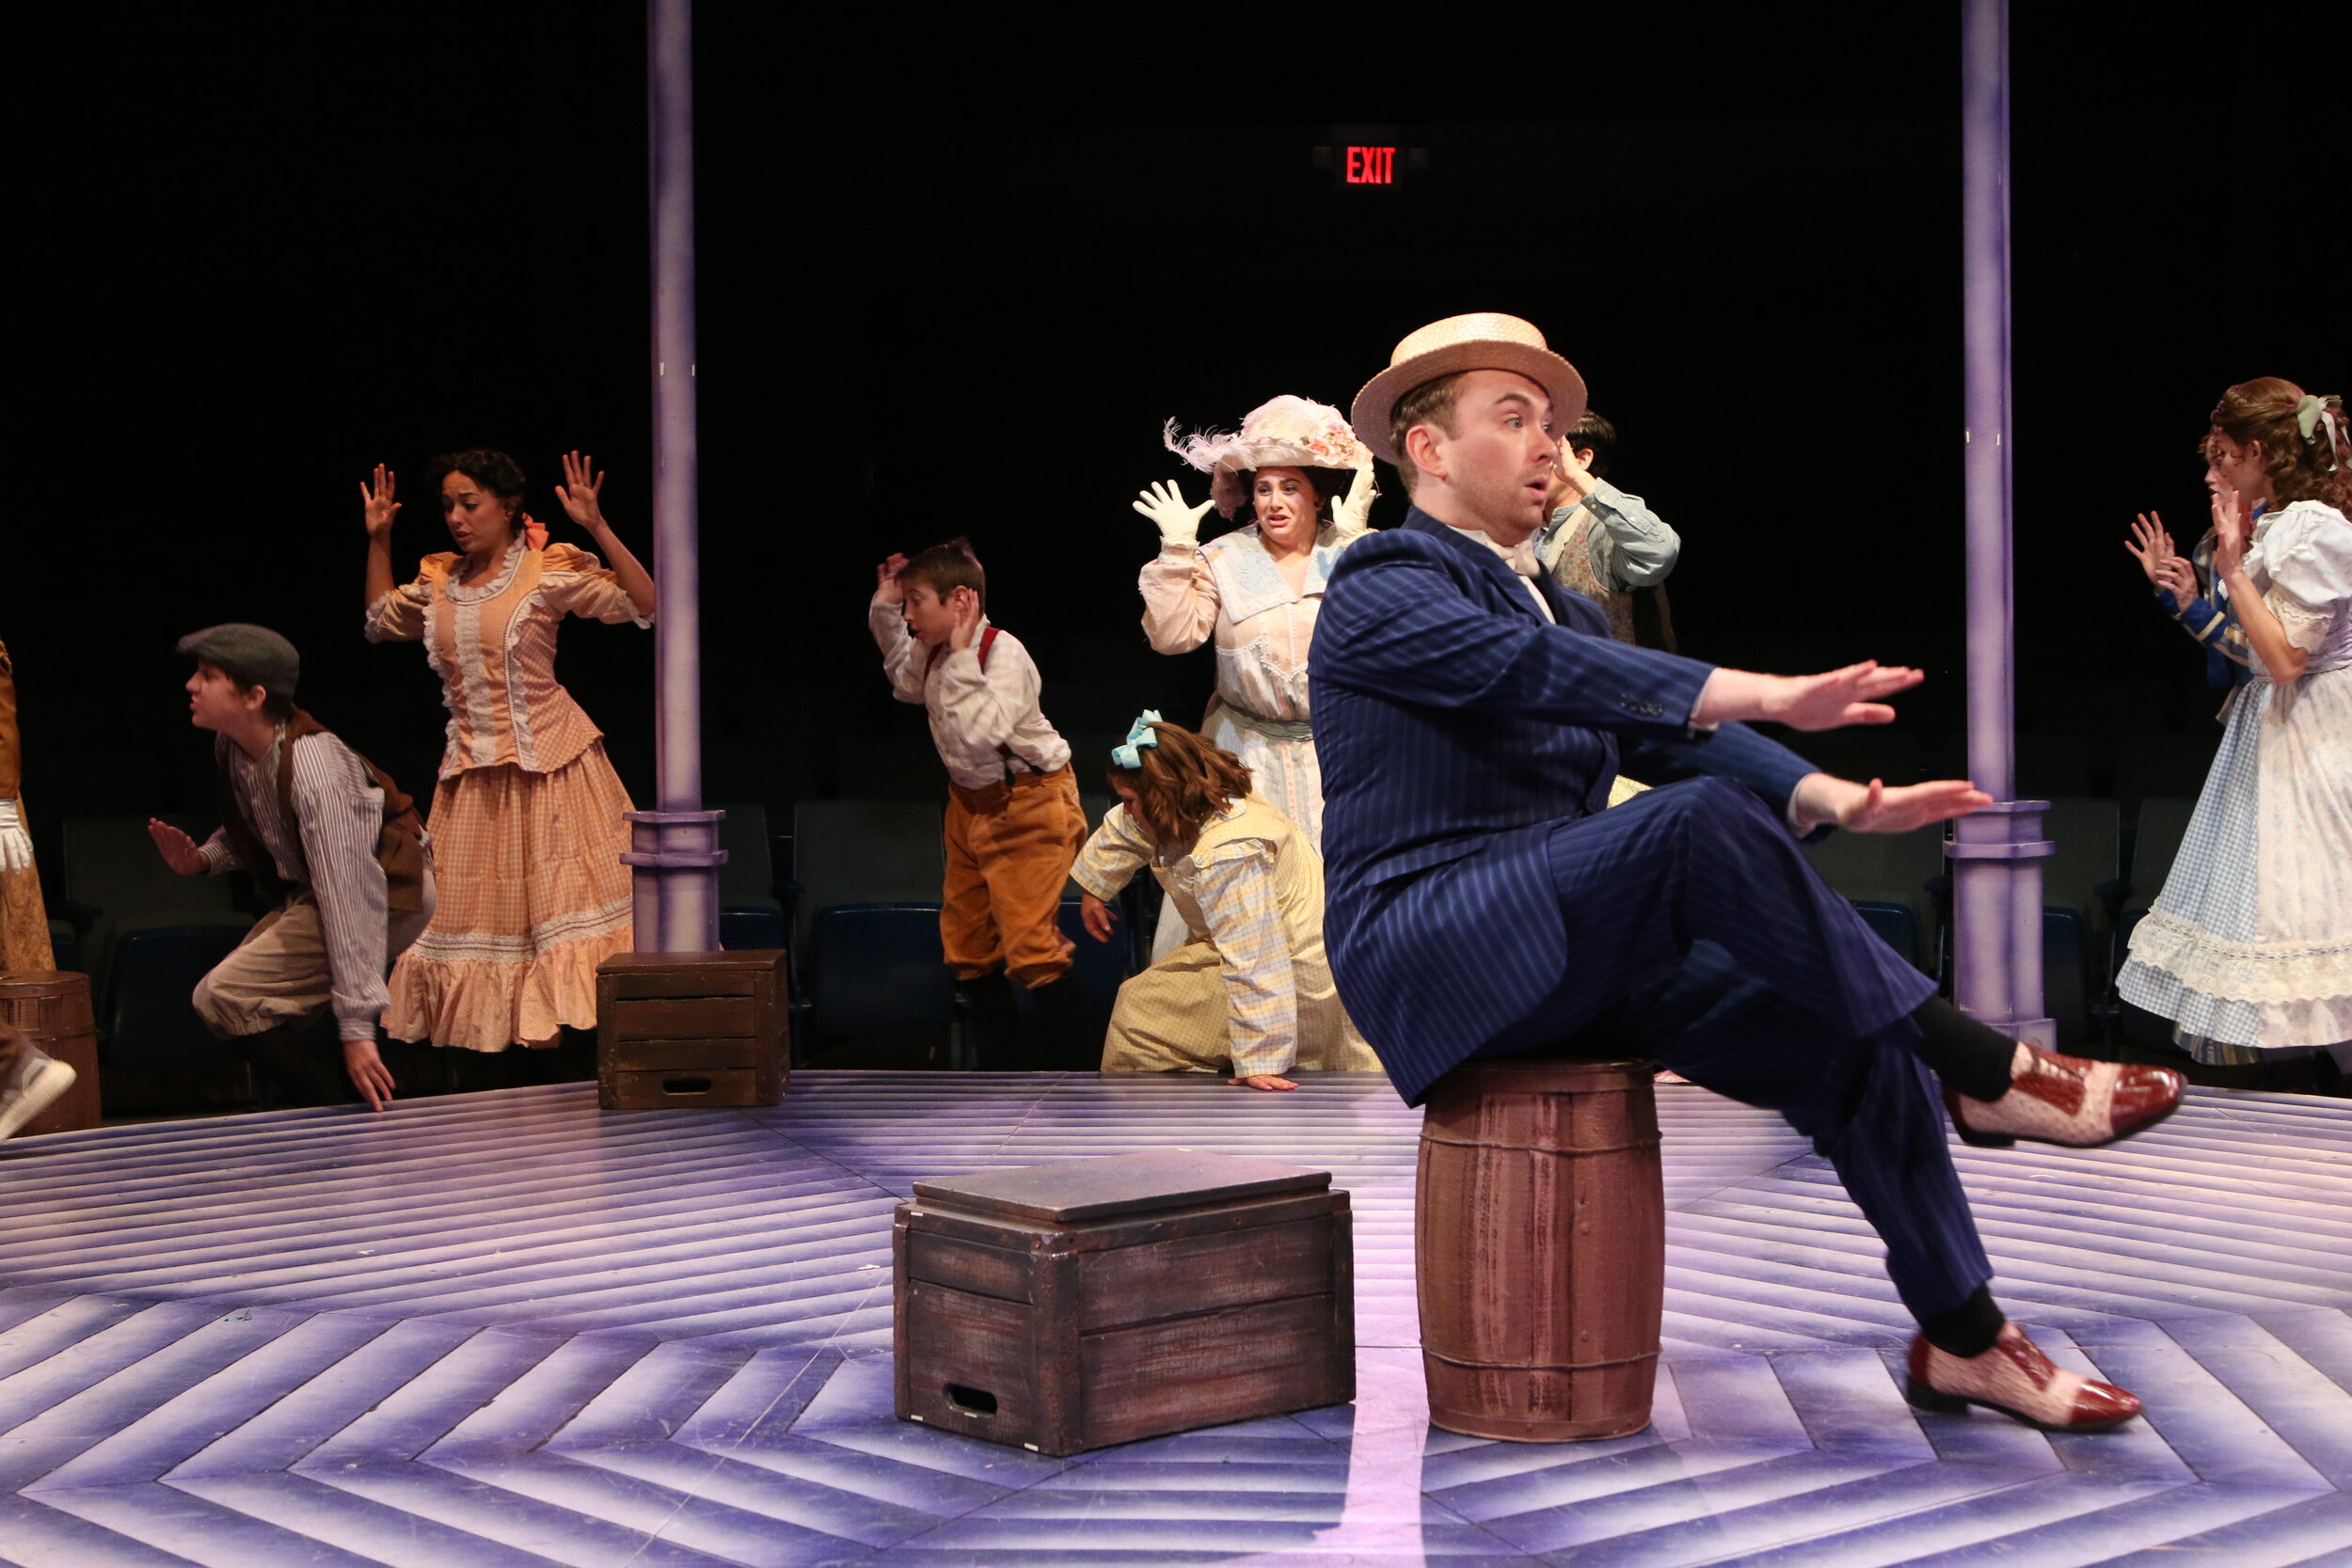  THE MUSIC MAN at The Wagon Wheel Theatre  